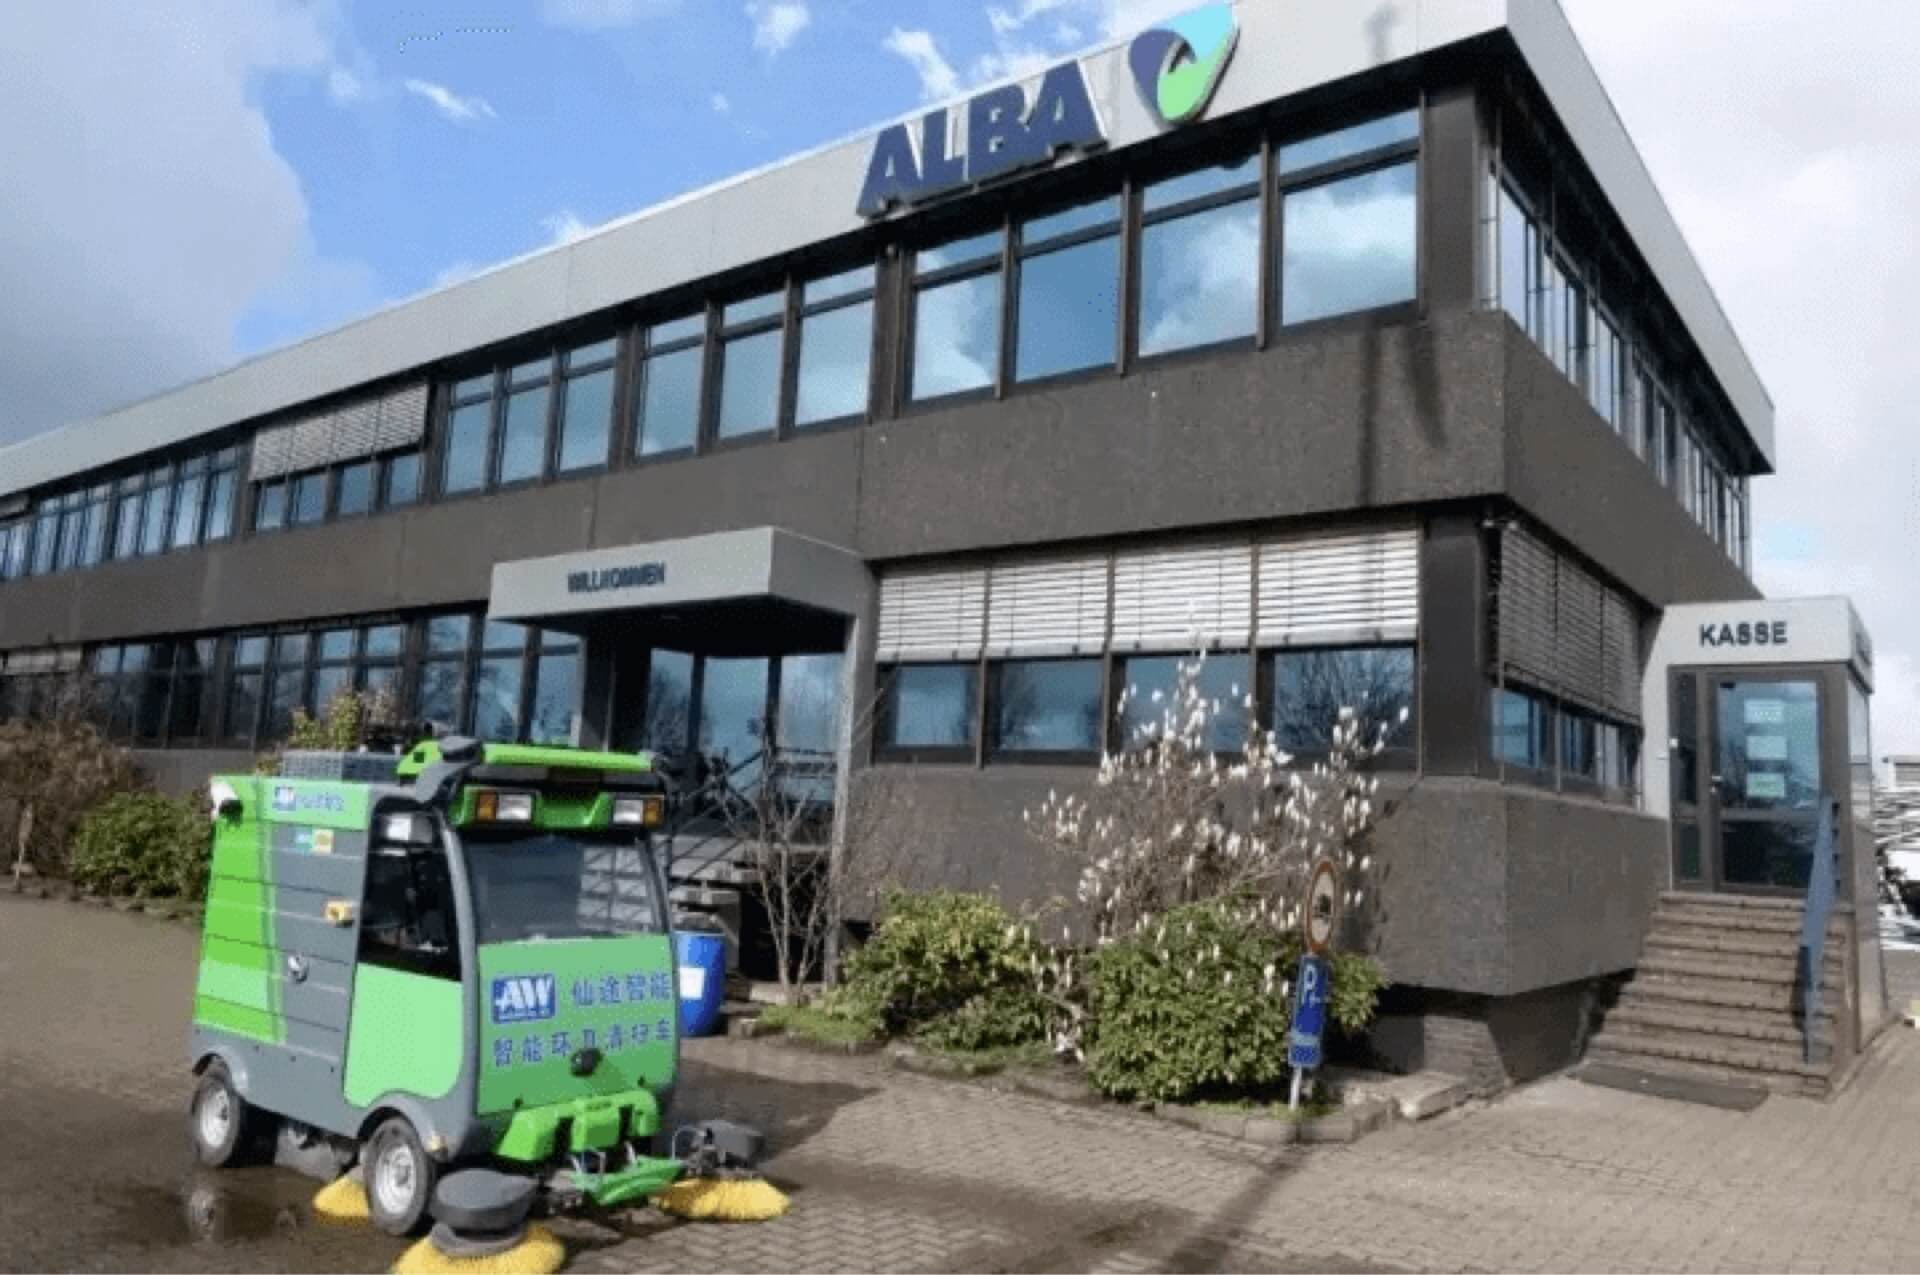 Autowise.ai autonomous driving sweeper deployed in Germany, becoming the first Chinese autonomous driving sweeper in European sanitation market